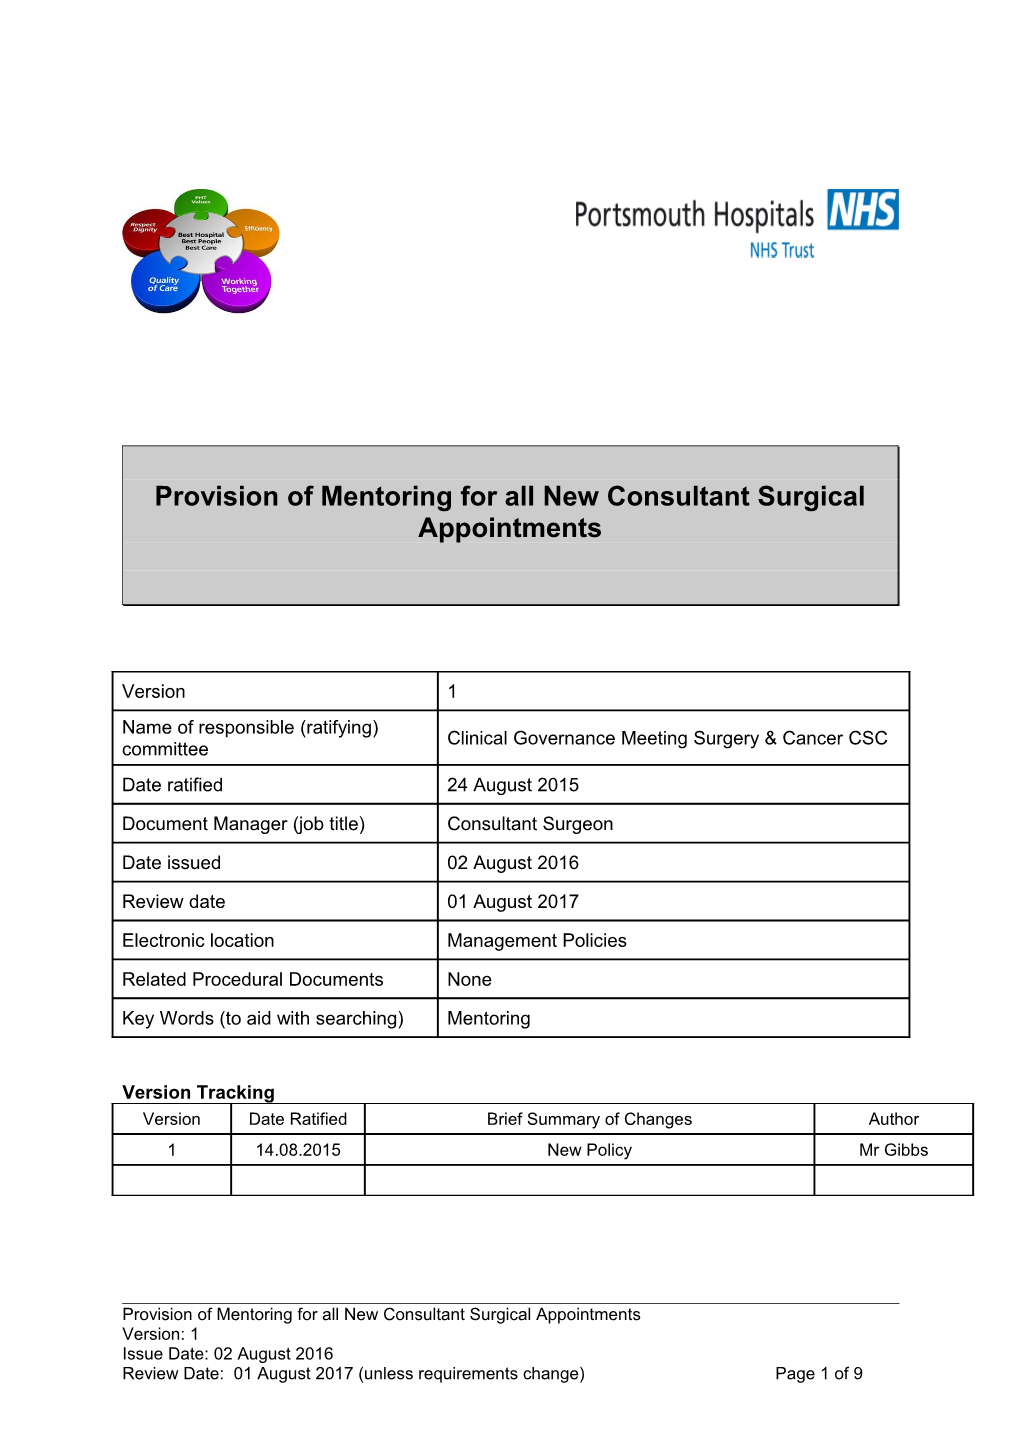 Provision of Mentoring for All New Consultant Surgical Appointments